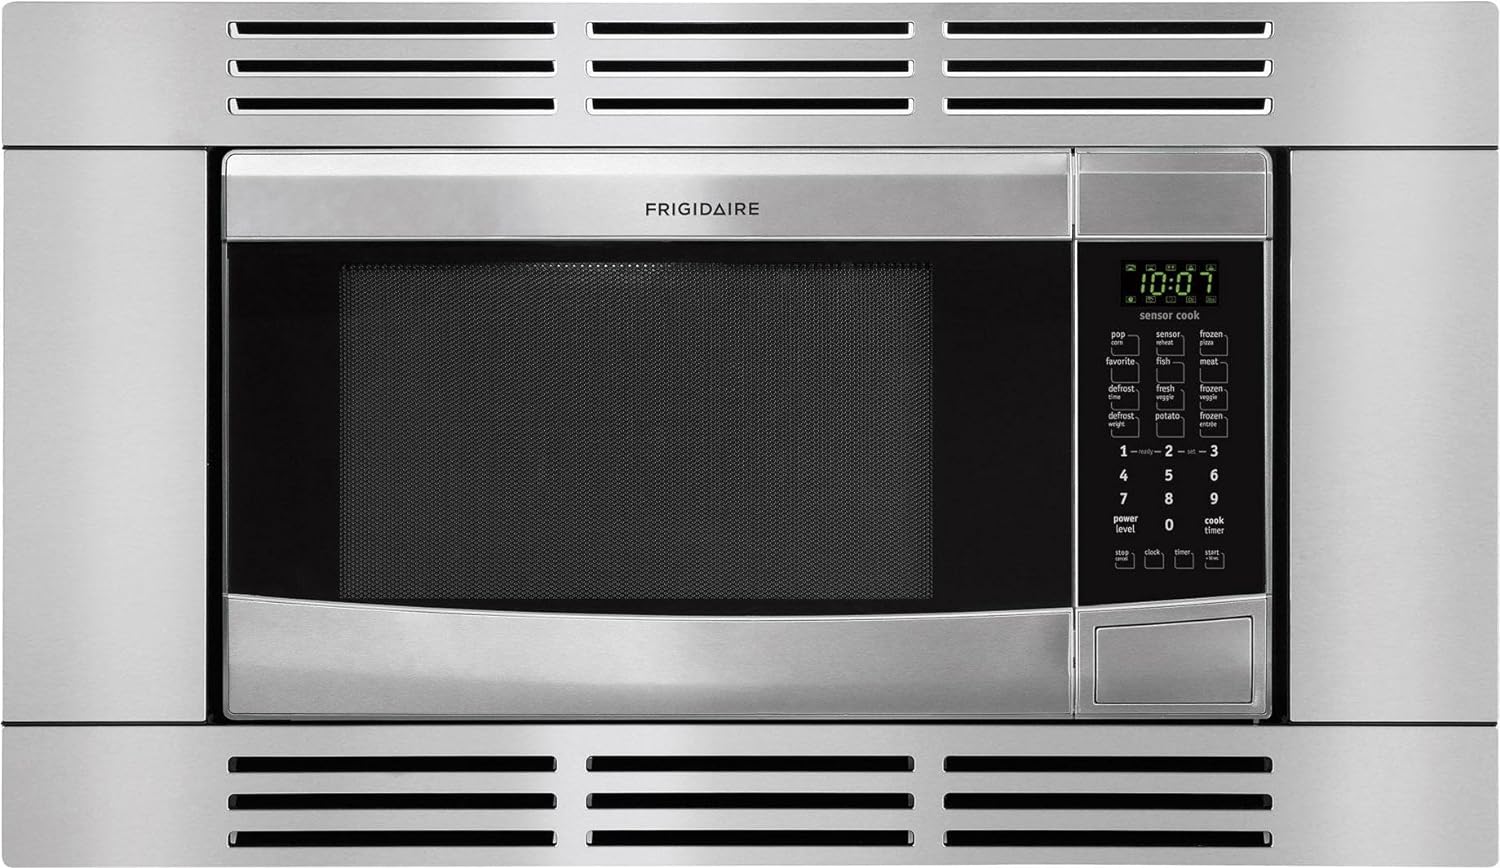 Frigidaire FFMO1611LS1.6 Cu. Ft. Stainless Steel Countertop Microwave